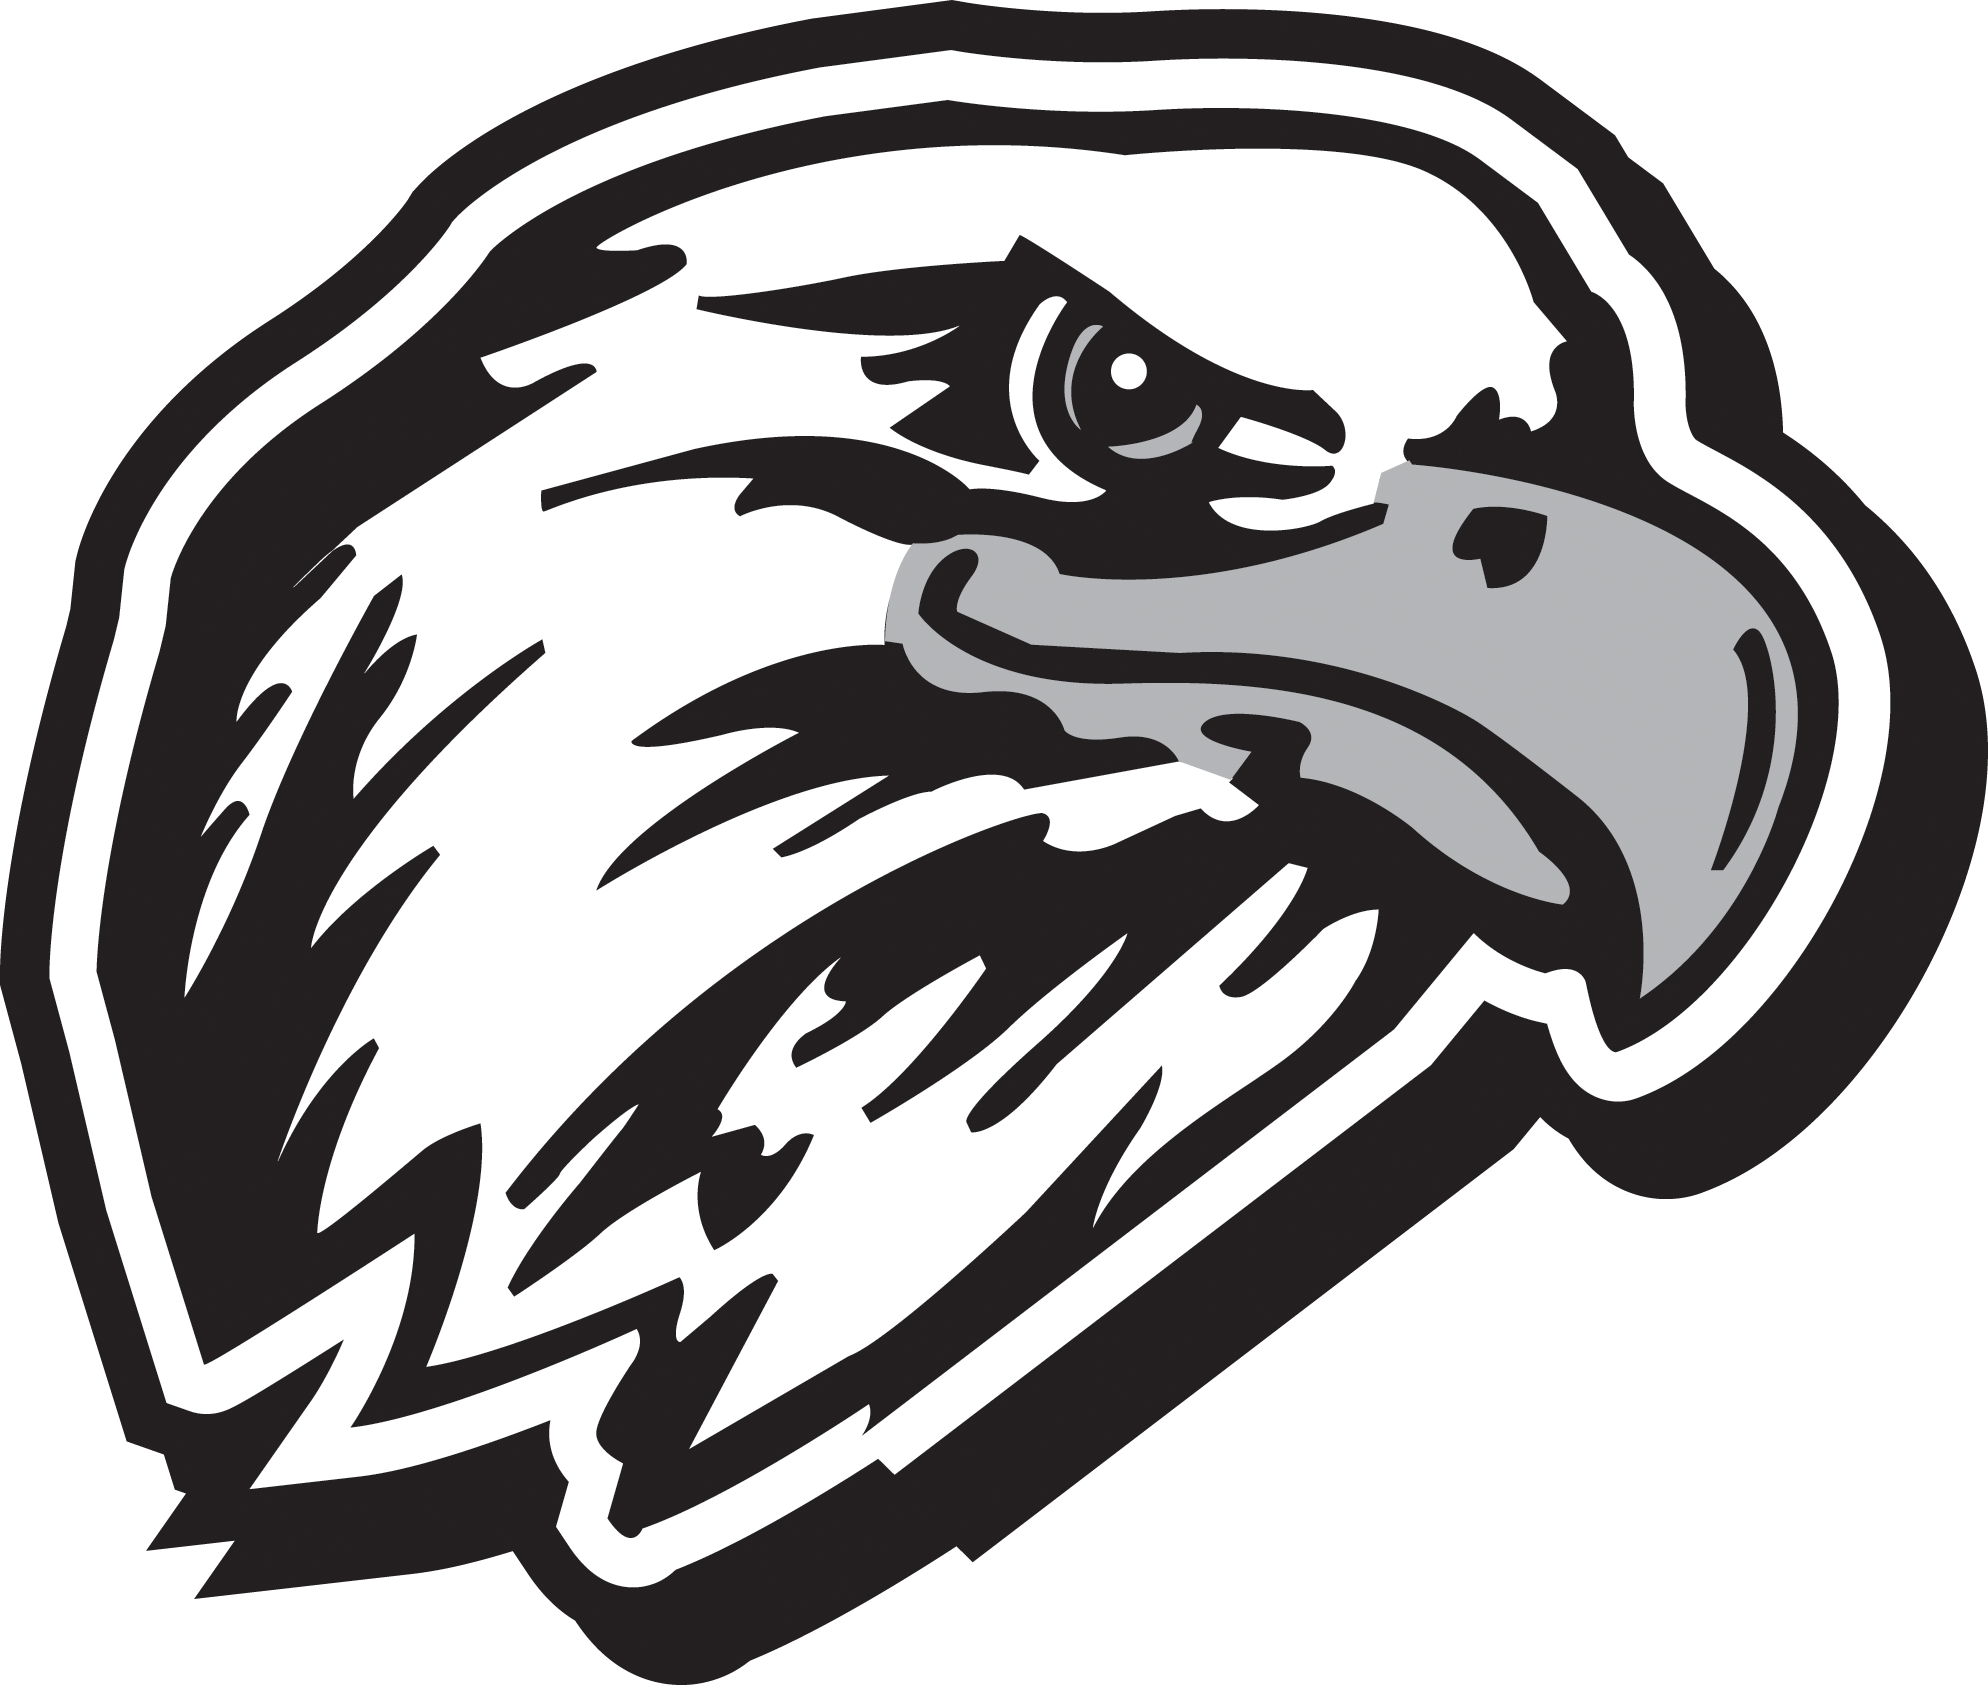 Black and White Eagle Football Logo - Eagle football mascot picture download - RR collections